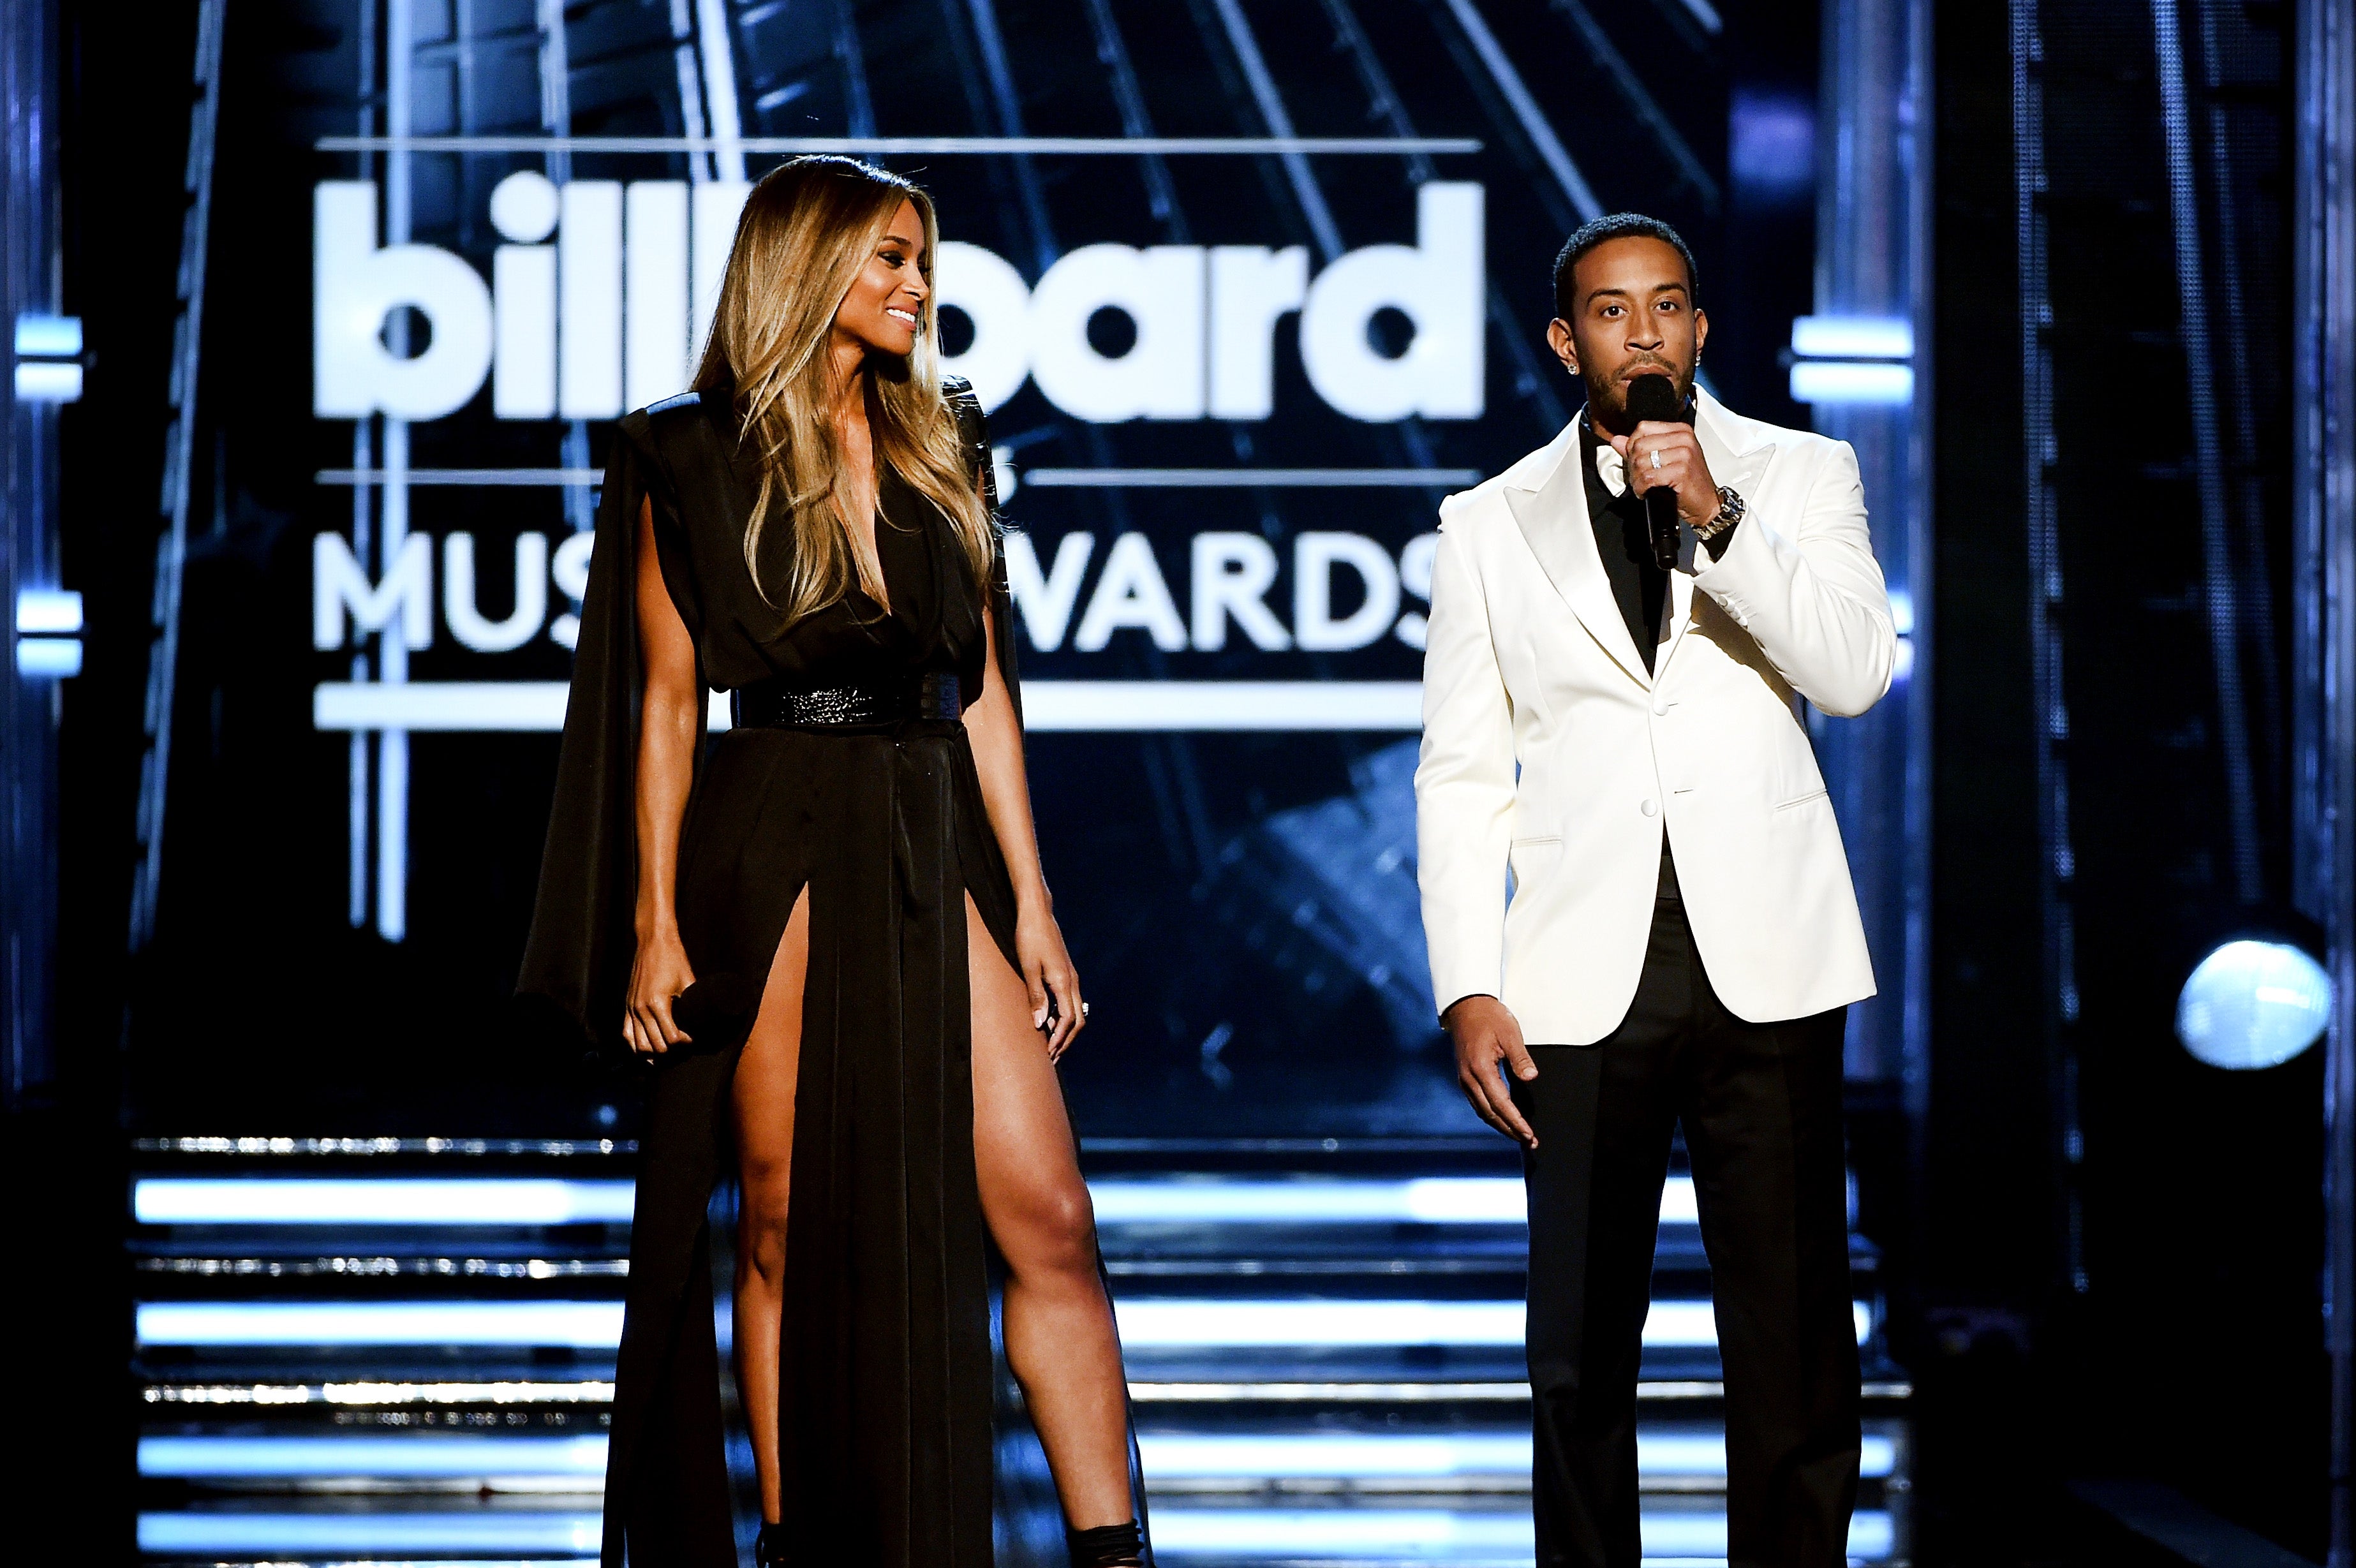 A Deep Dive Into Every Hairstyle Ciara Wore at the Billboard Music Awards
